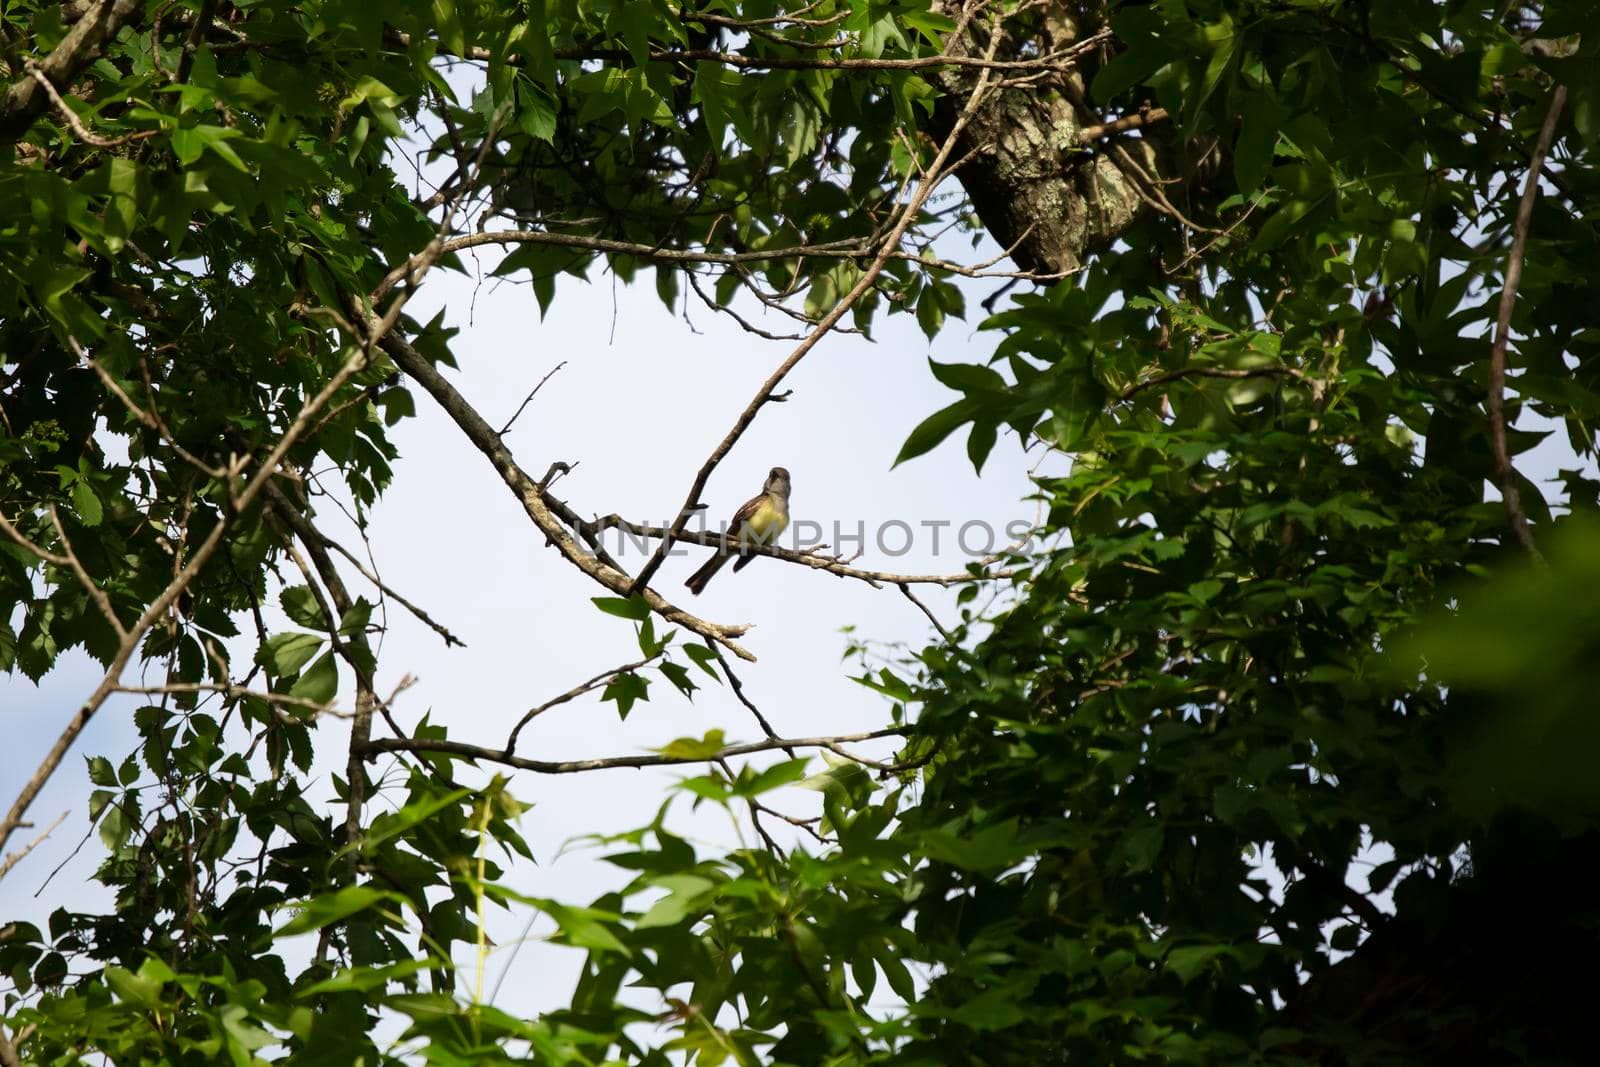 Curious great-crested flycatcher (Myiarchus crinitus) looking around in a clearing between tree branches